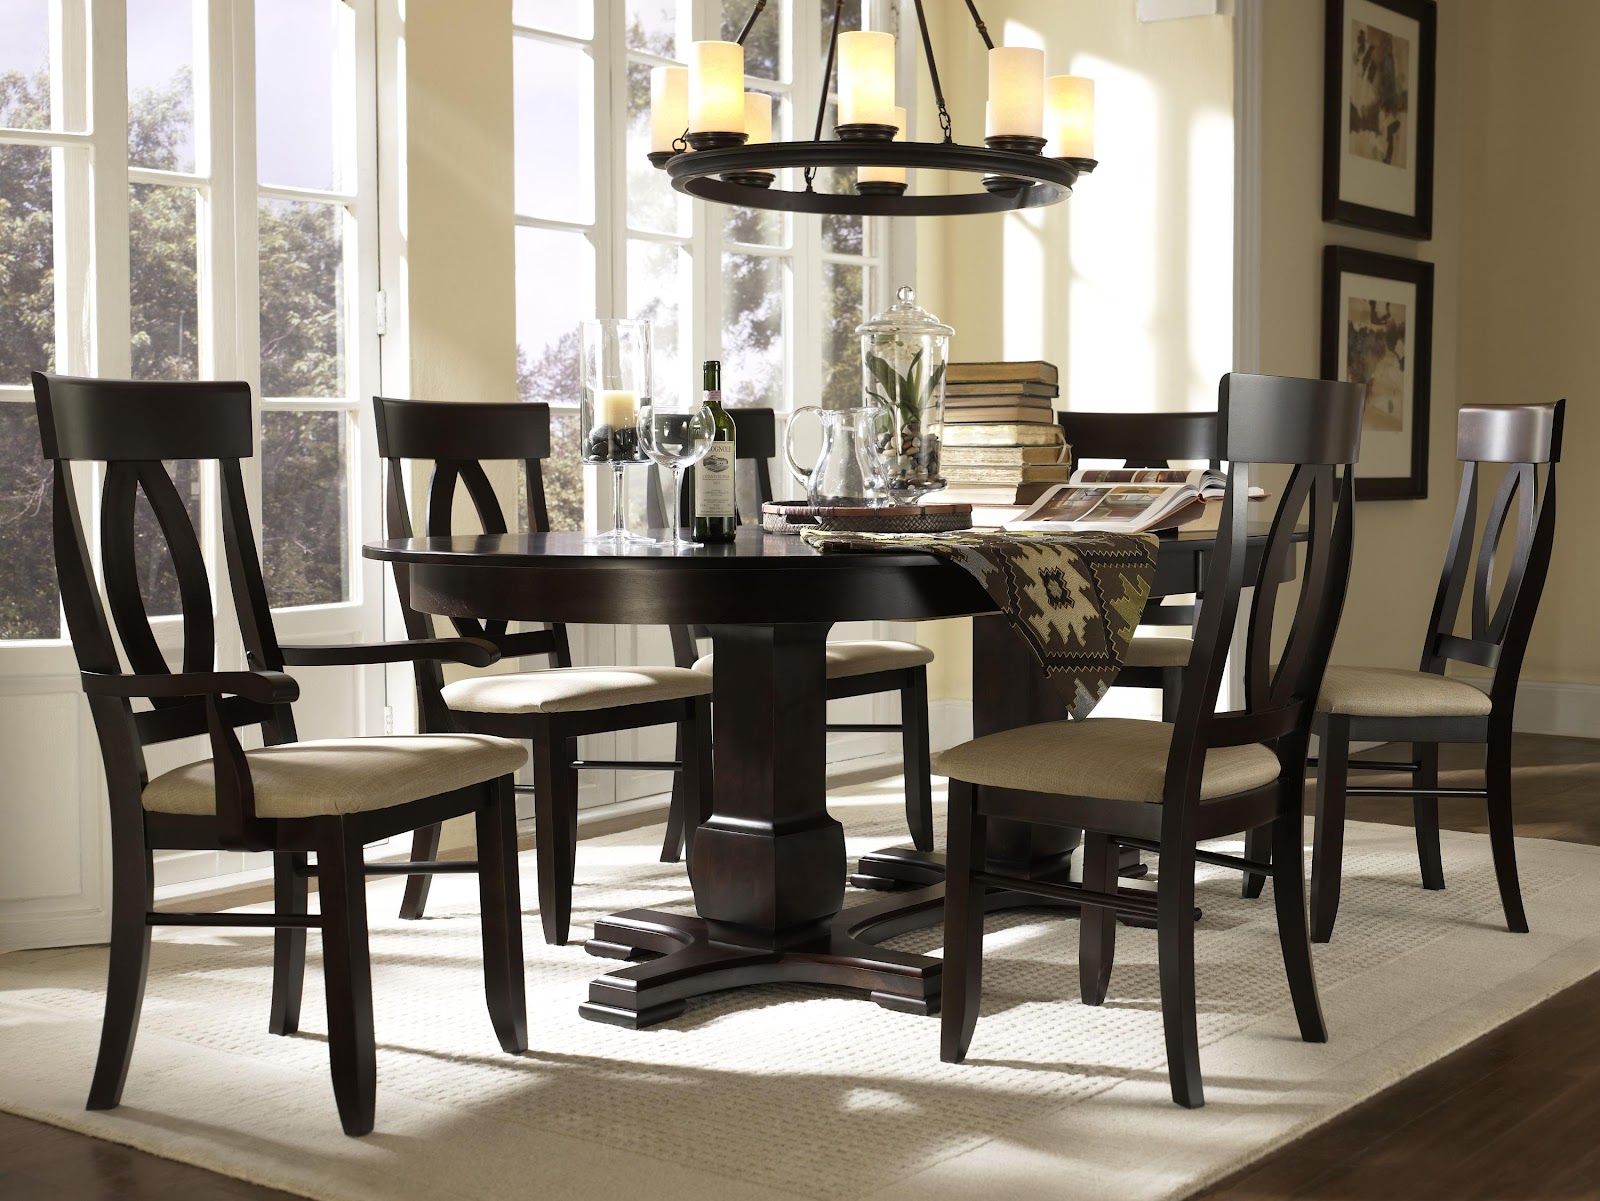 Canadel Furniture Long Island New York NY DINING ROOM 